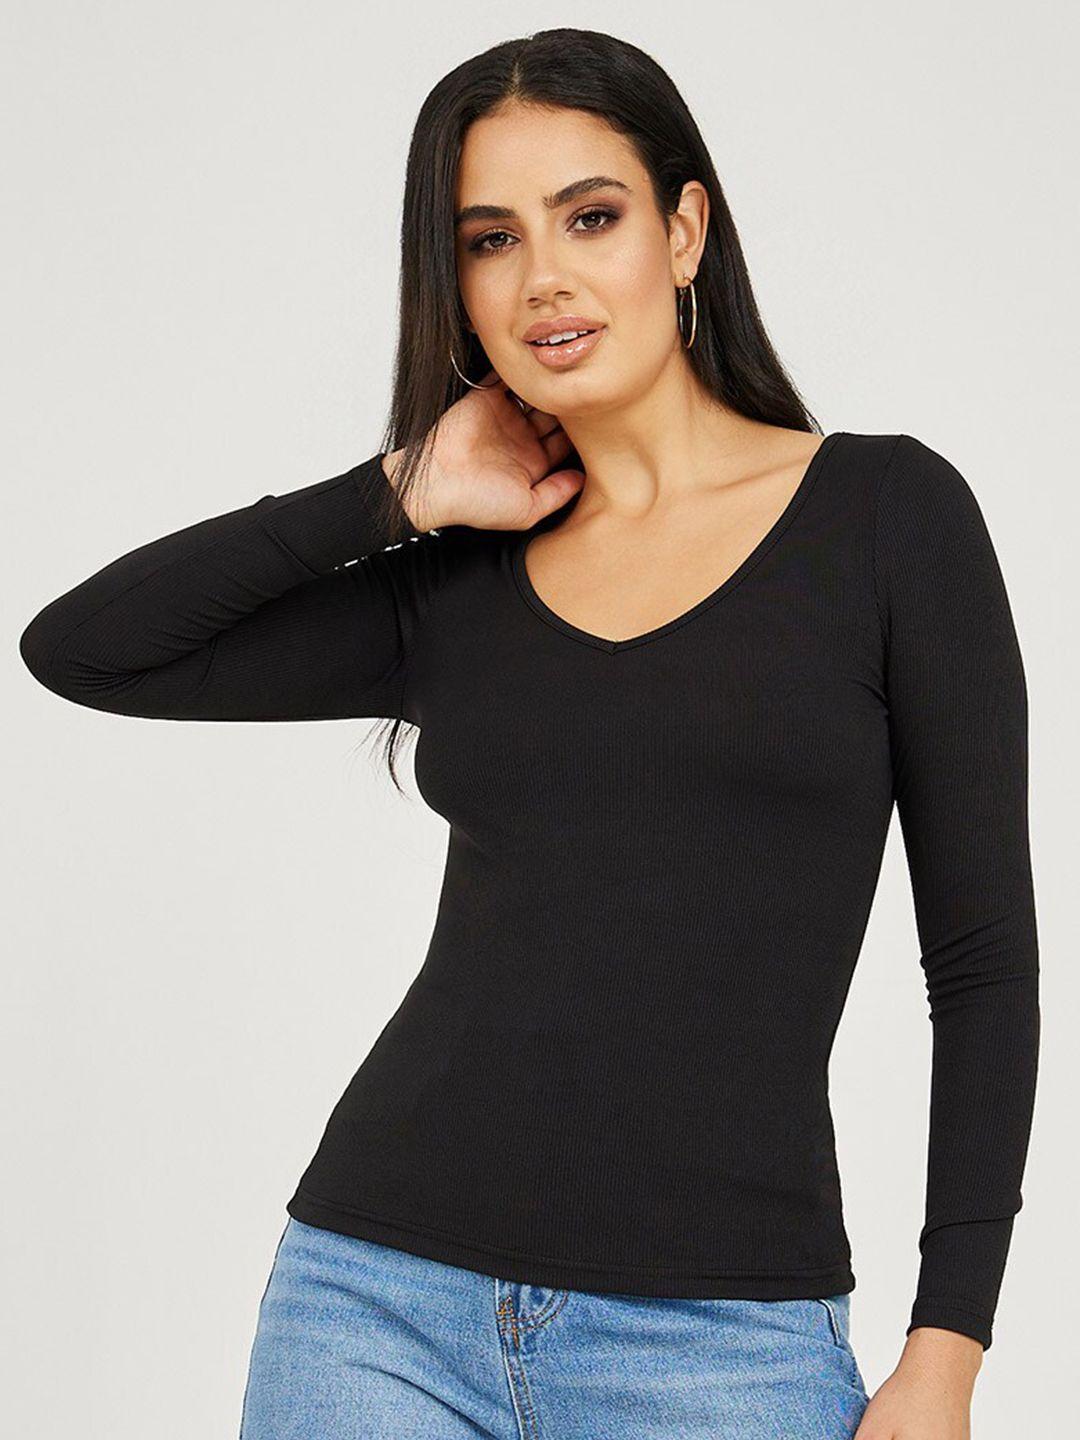 styli black solid top